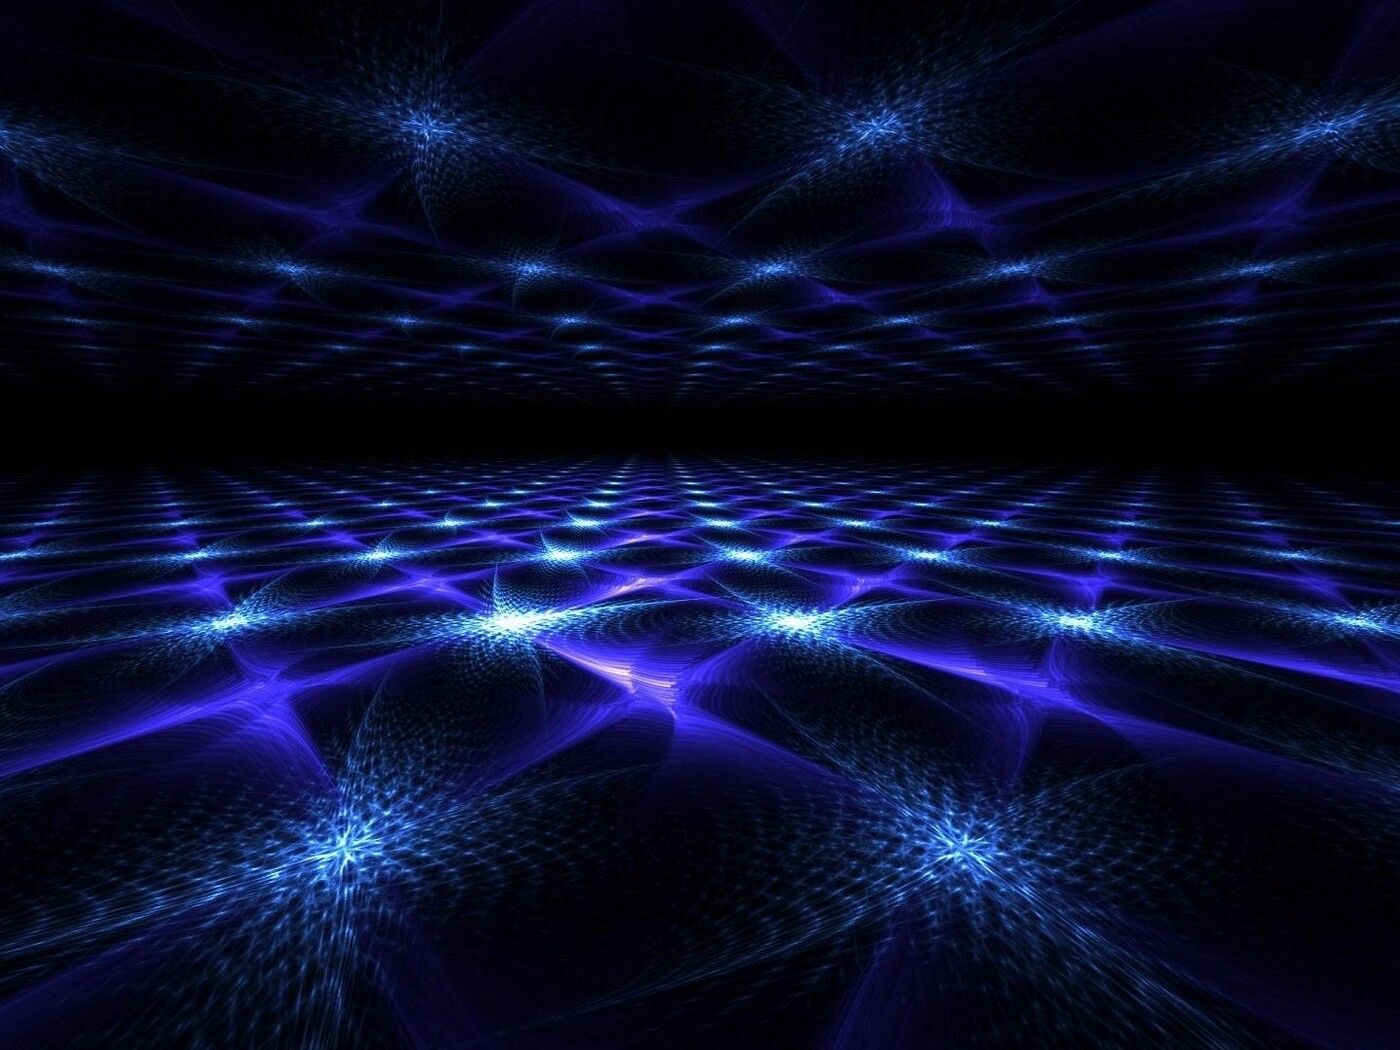 Abstract dark wallpaper with blue lights